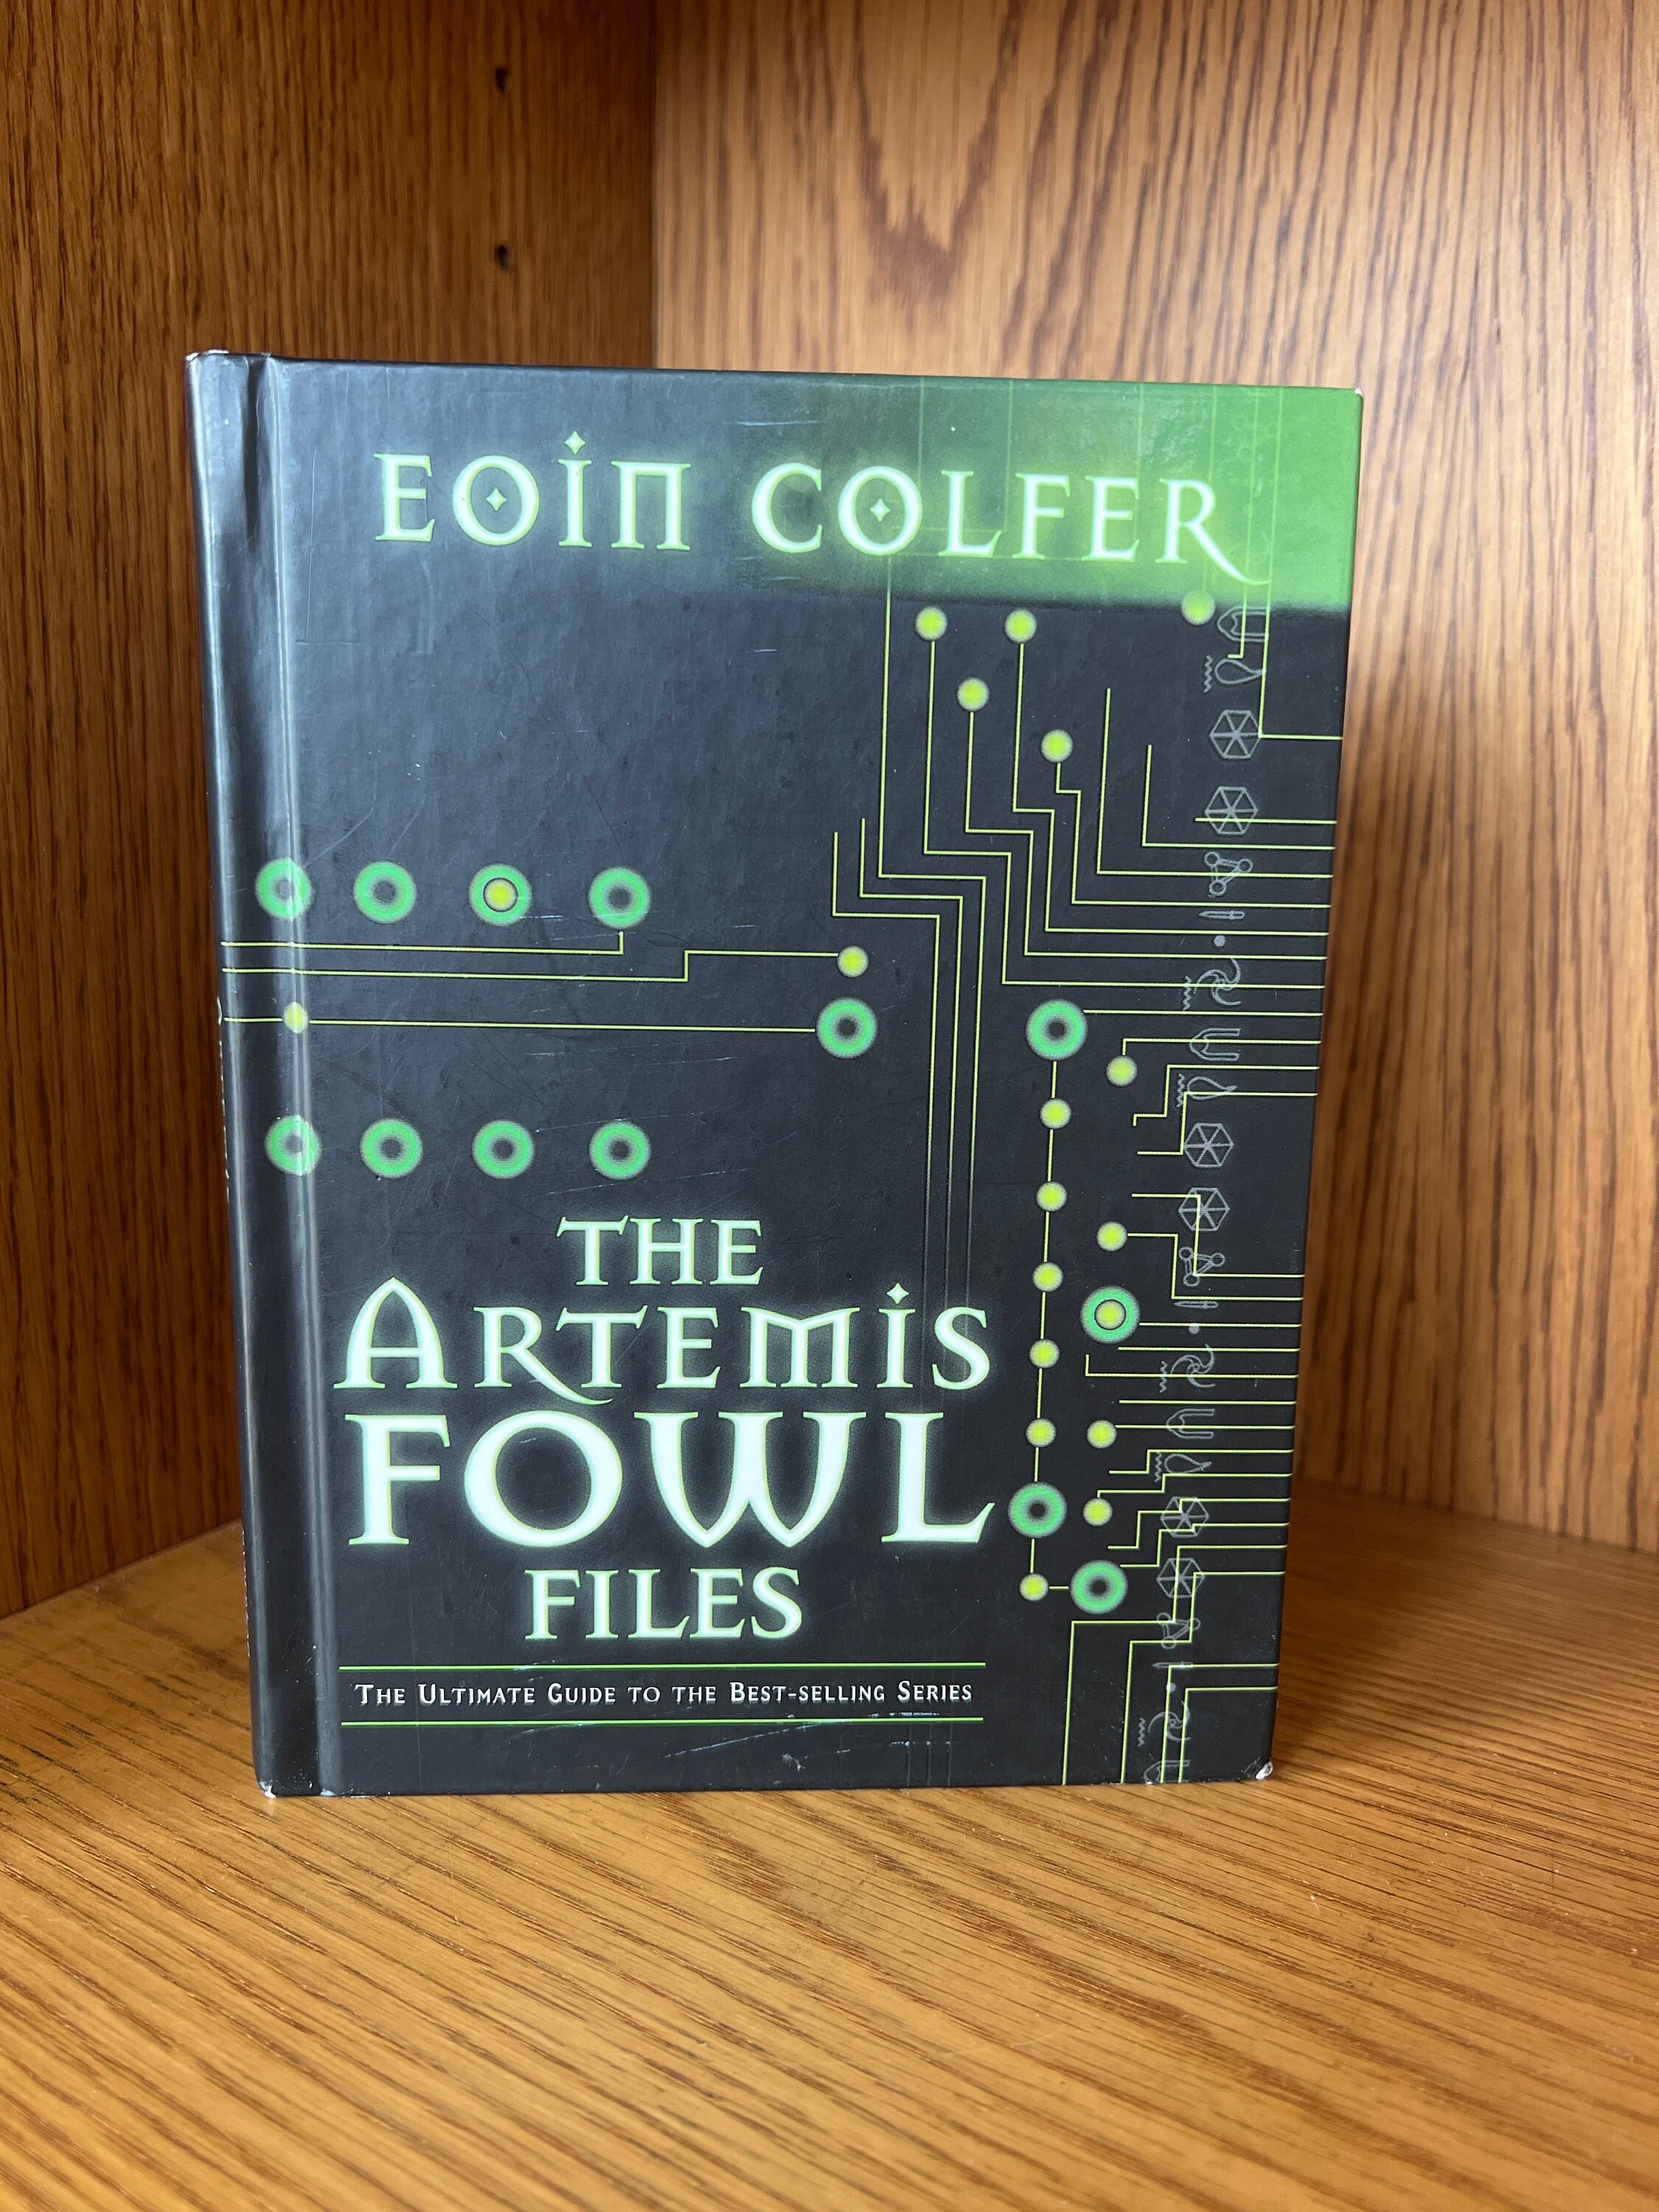 Artemis Fowl Lot of 7 Childrens Books by Eoin Colfer Matched Set 1-7